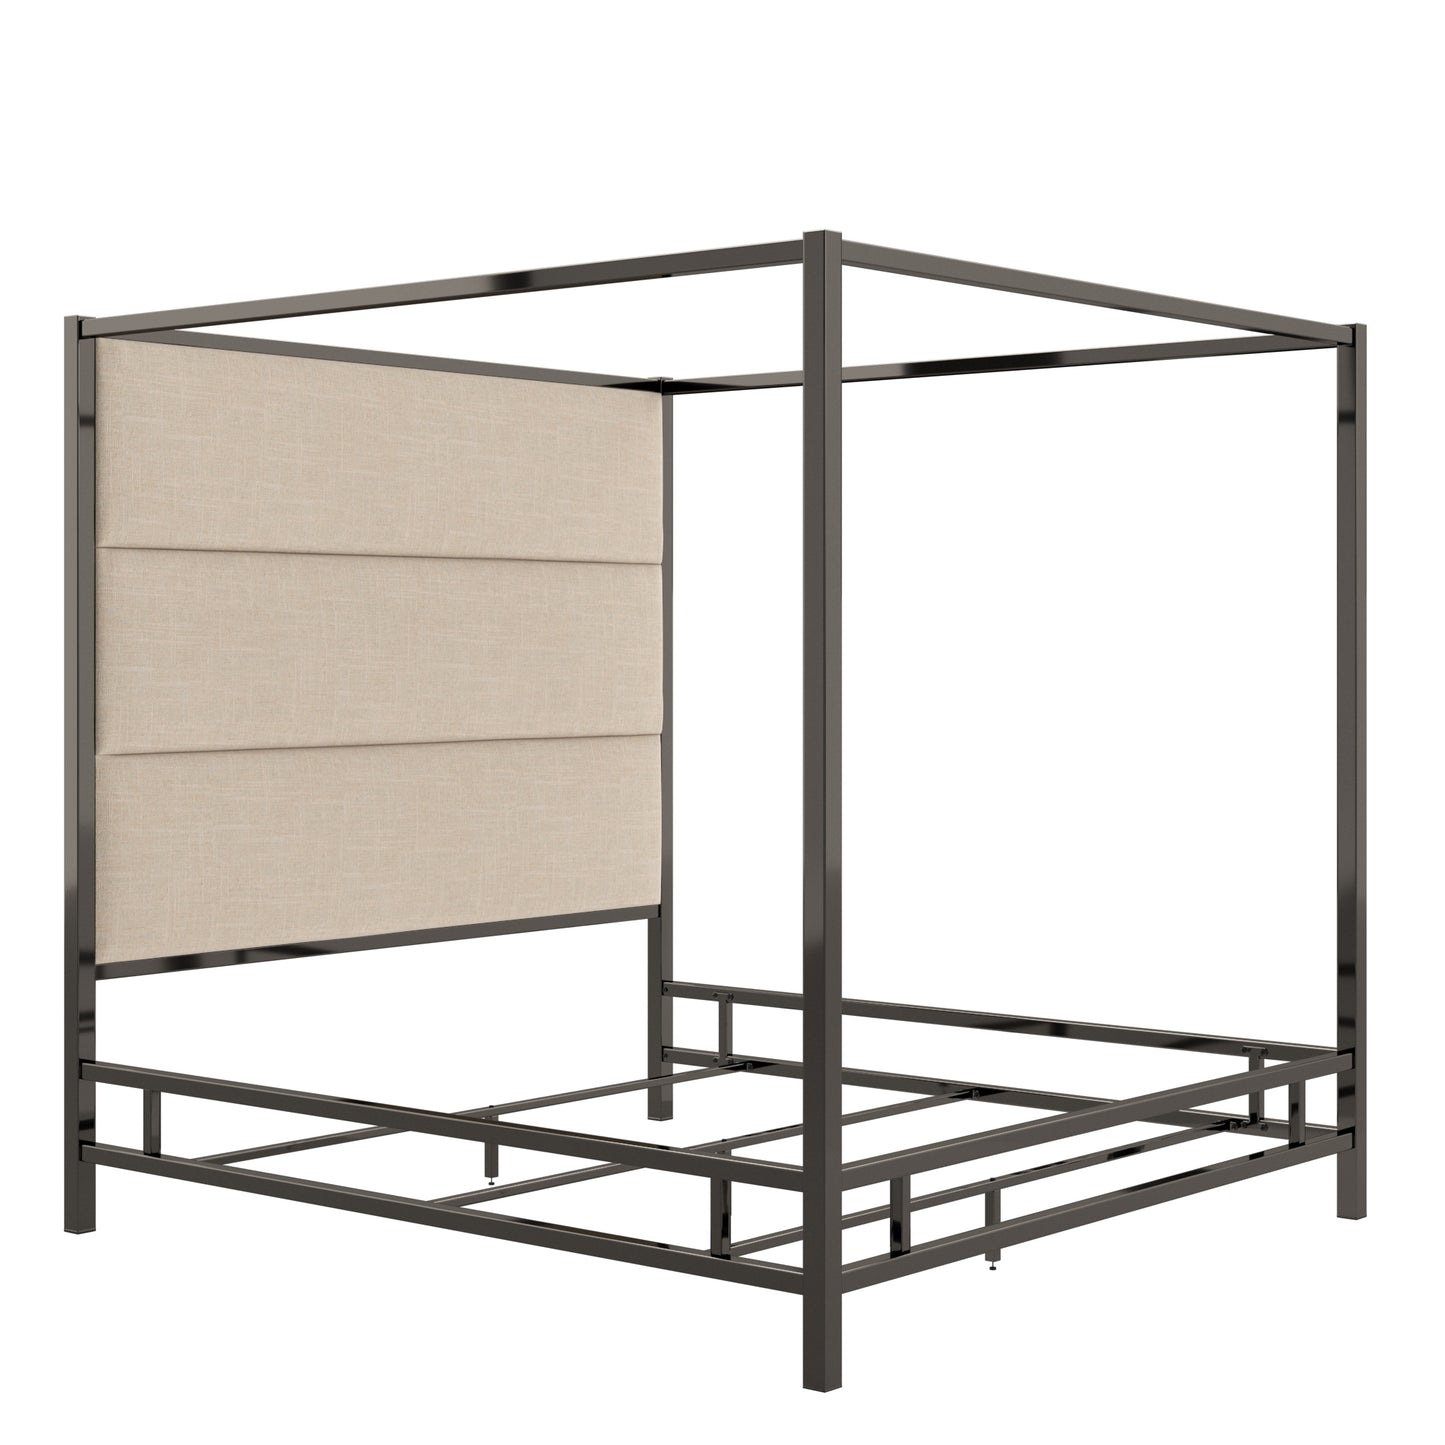 Metal Canopy Bed with Linen Panel Headboard - Off-White Linen, Black Nickel Finish, King Size